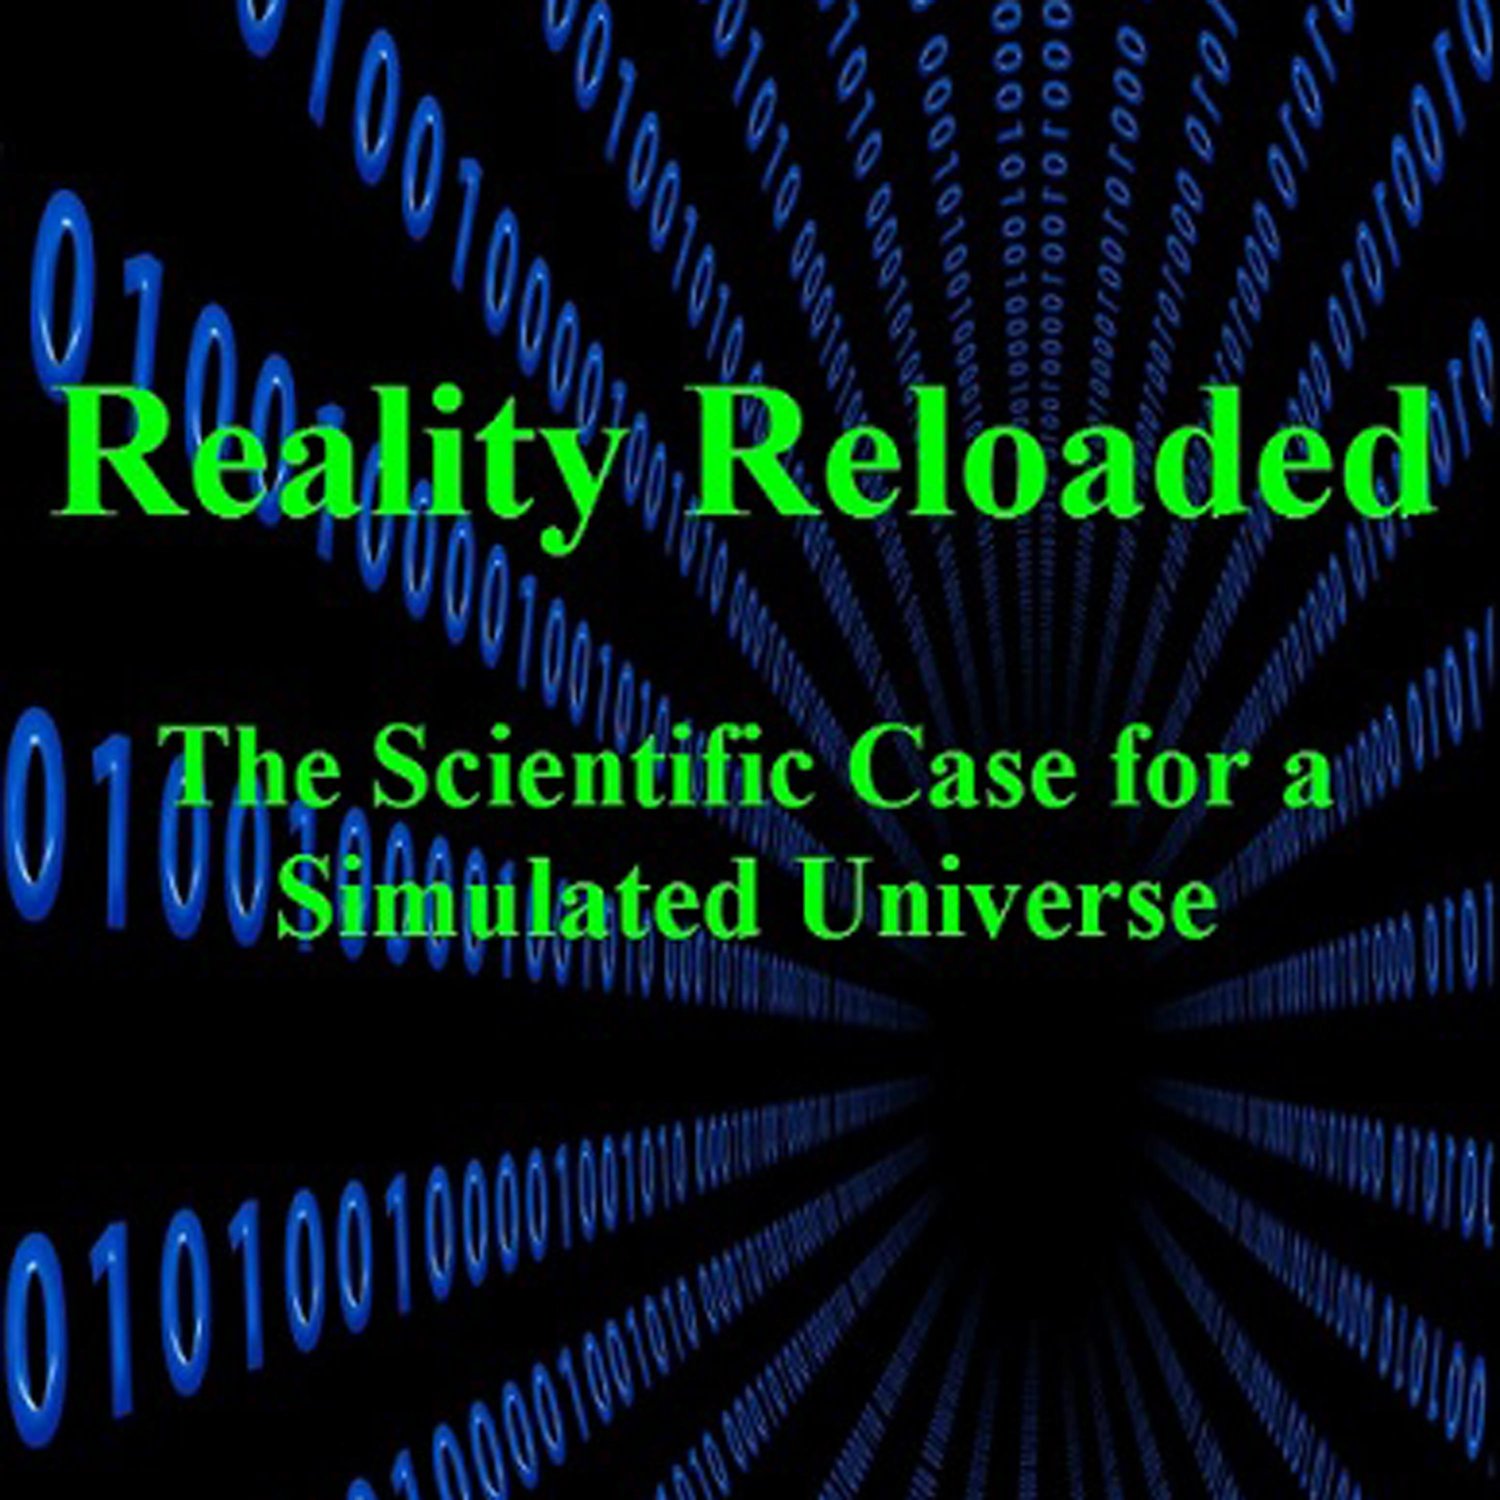 Are we living in a Simulated Universe? - Highlights - MELVIN VOPSON